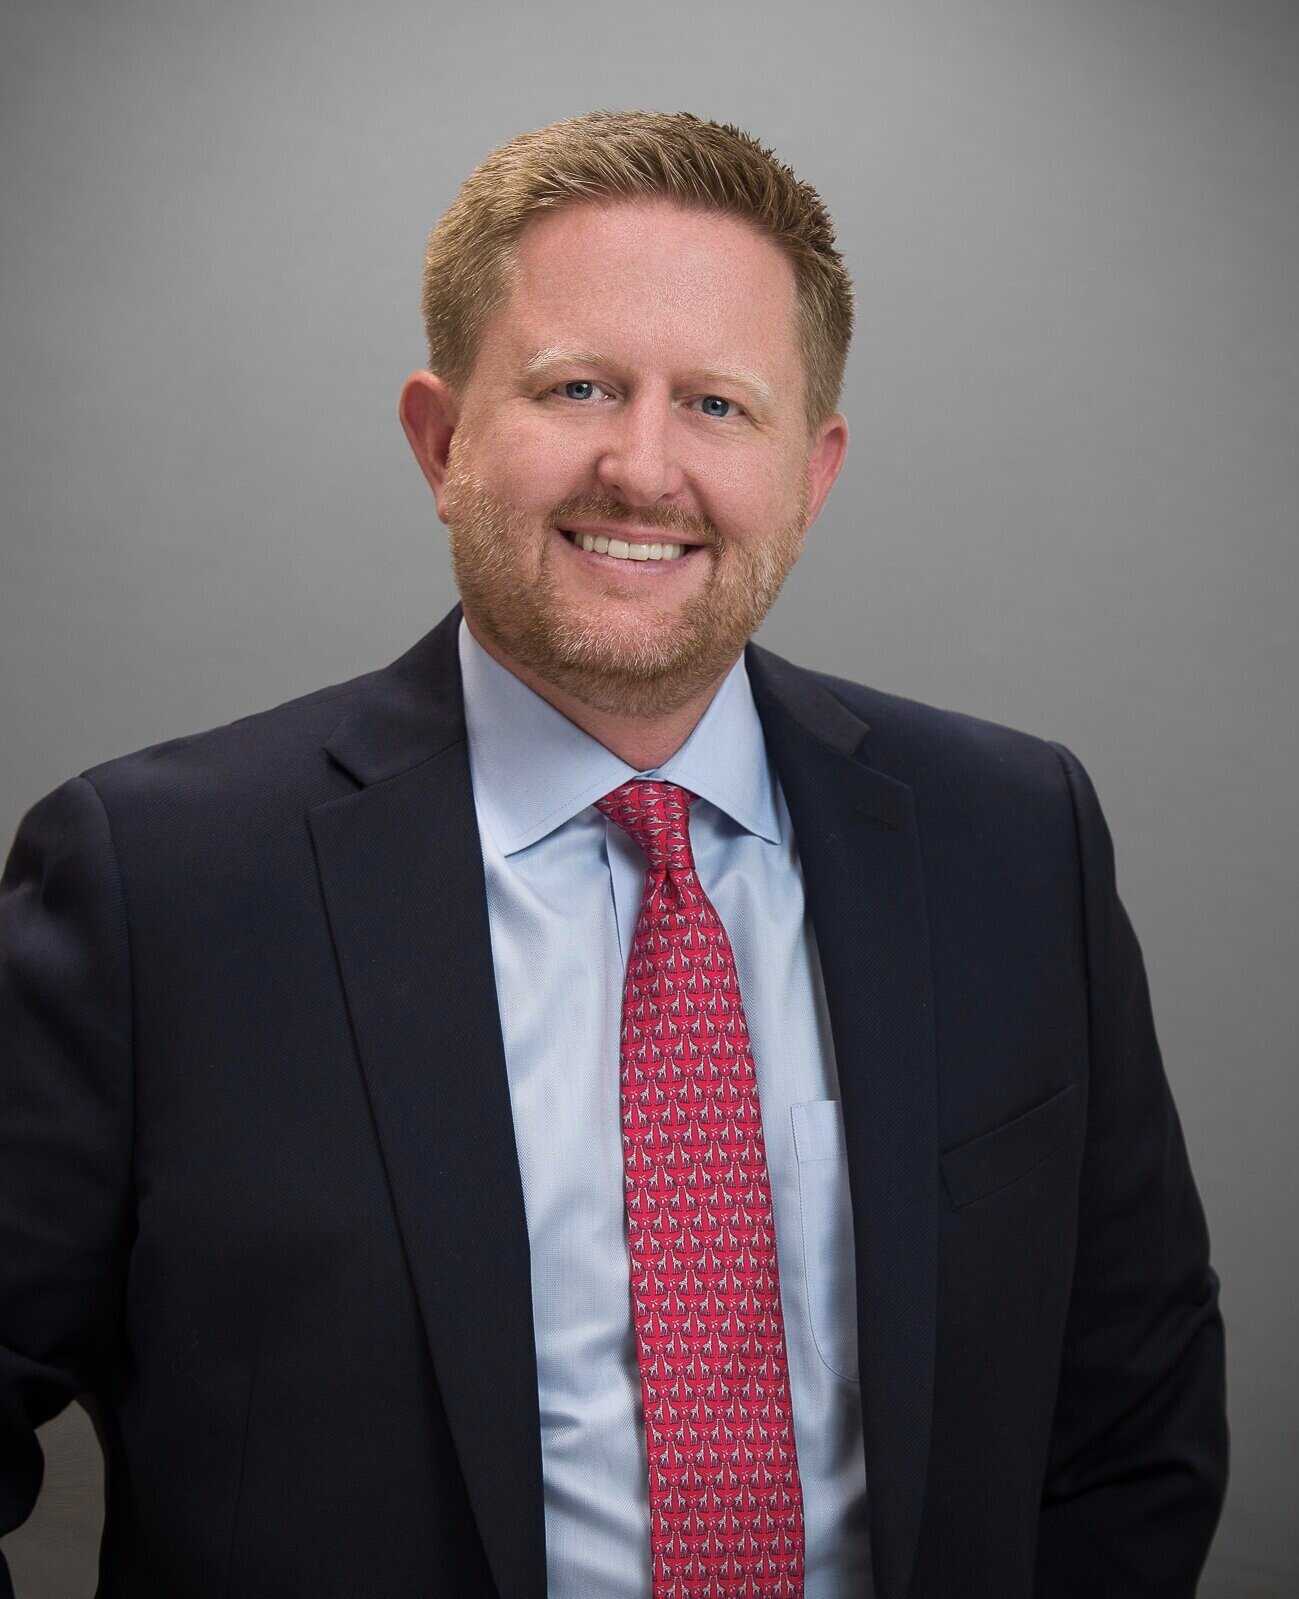  Dathan Weems is a litigation and mediation attorney in private practice in Albuquerque. A native New Mexican, he was born and raised in Farmington. He attended Trinity University in San Antonio, Texas for his undergraduate and came home to get his l